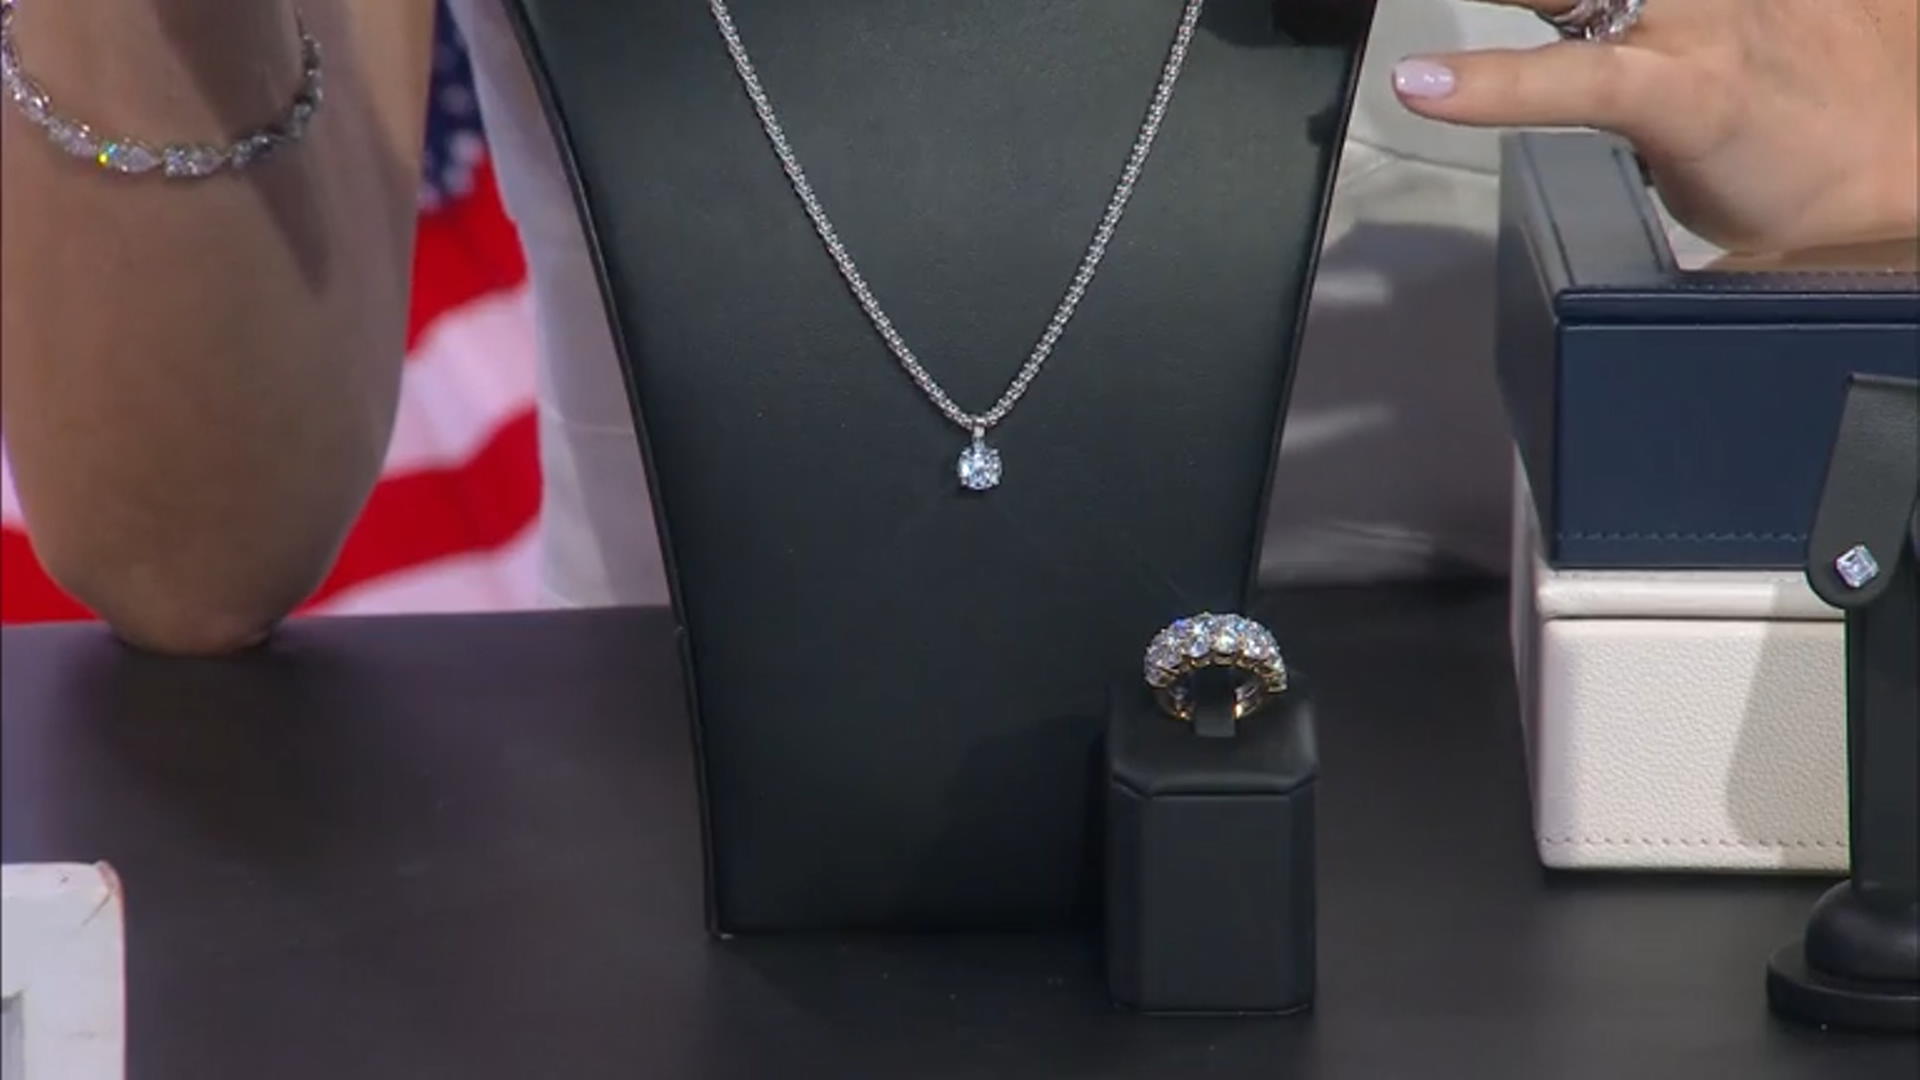 White Cubic Zirconia Platinum Over Sterling Silver Pendant With Popcorn Chain 2.00ctw Video Thumbnail